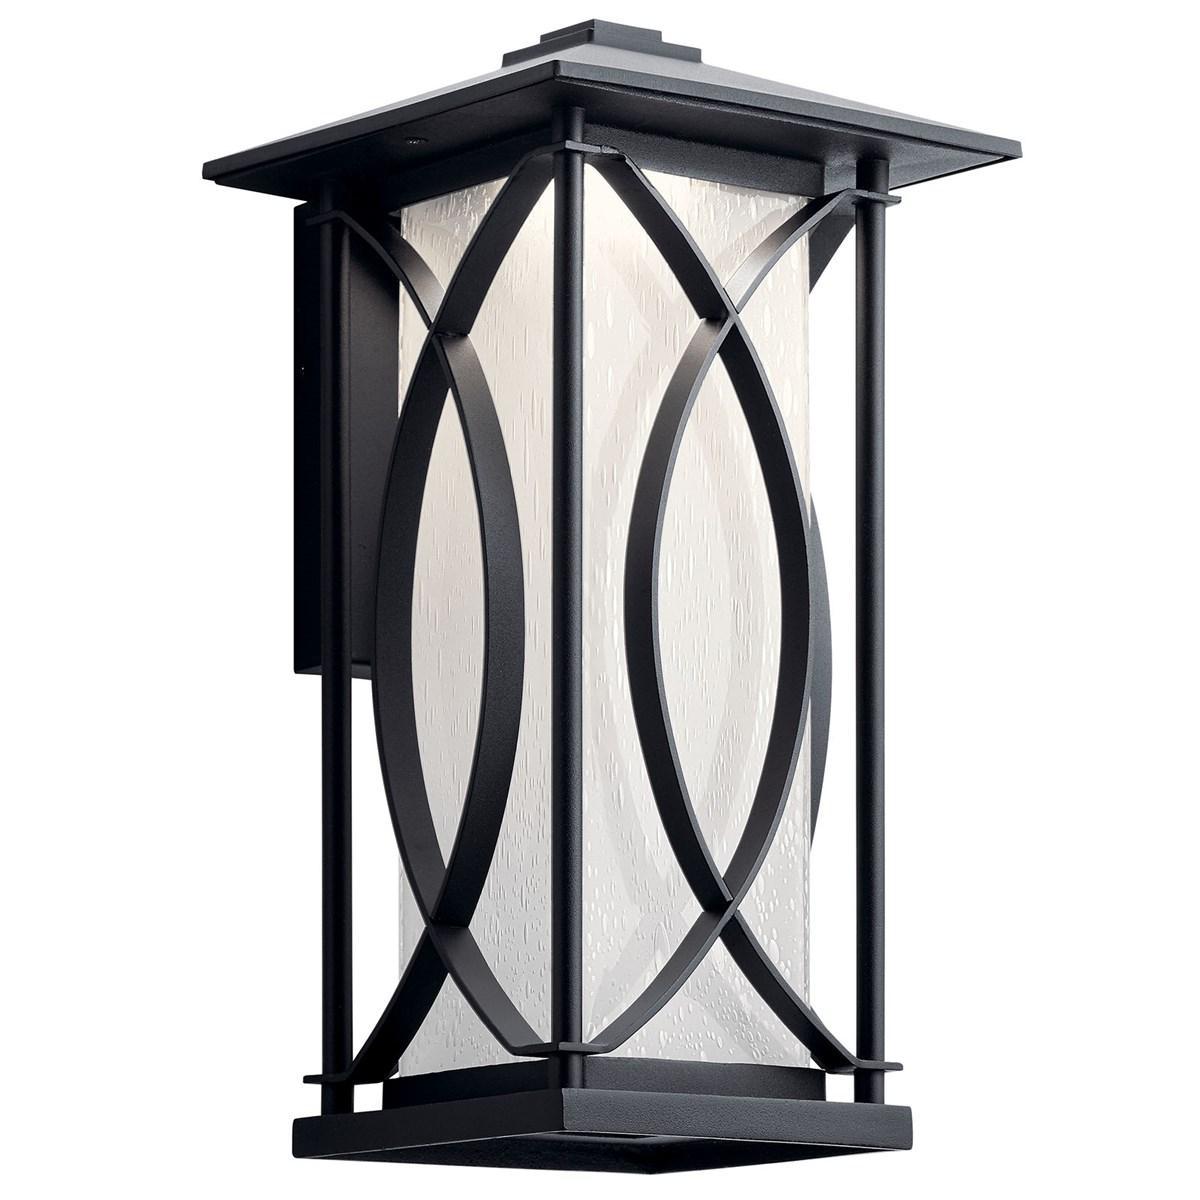 Ashbern 15 in. LED Outdoor Wall Sconce 300 Lumens 3000K Black Finish